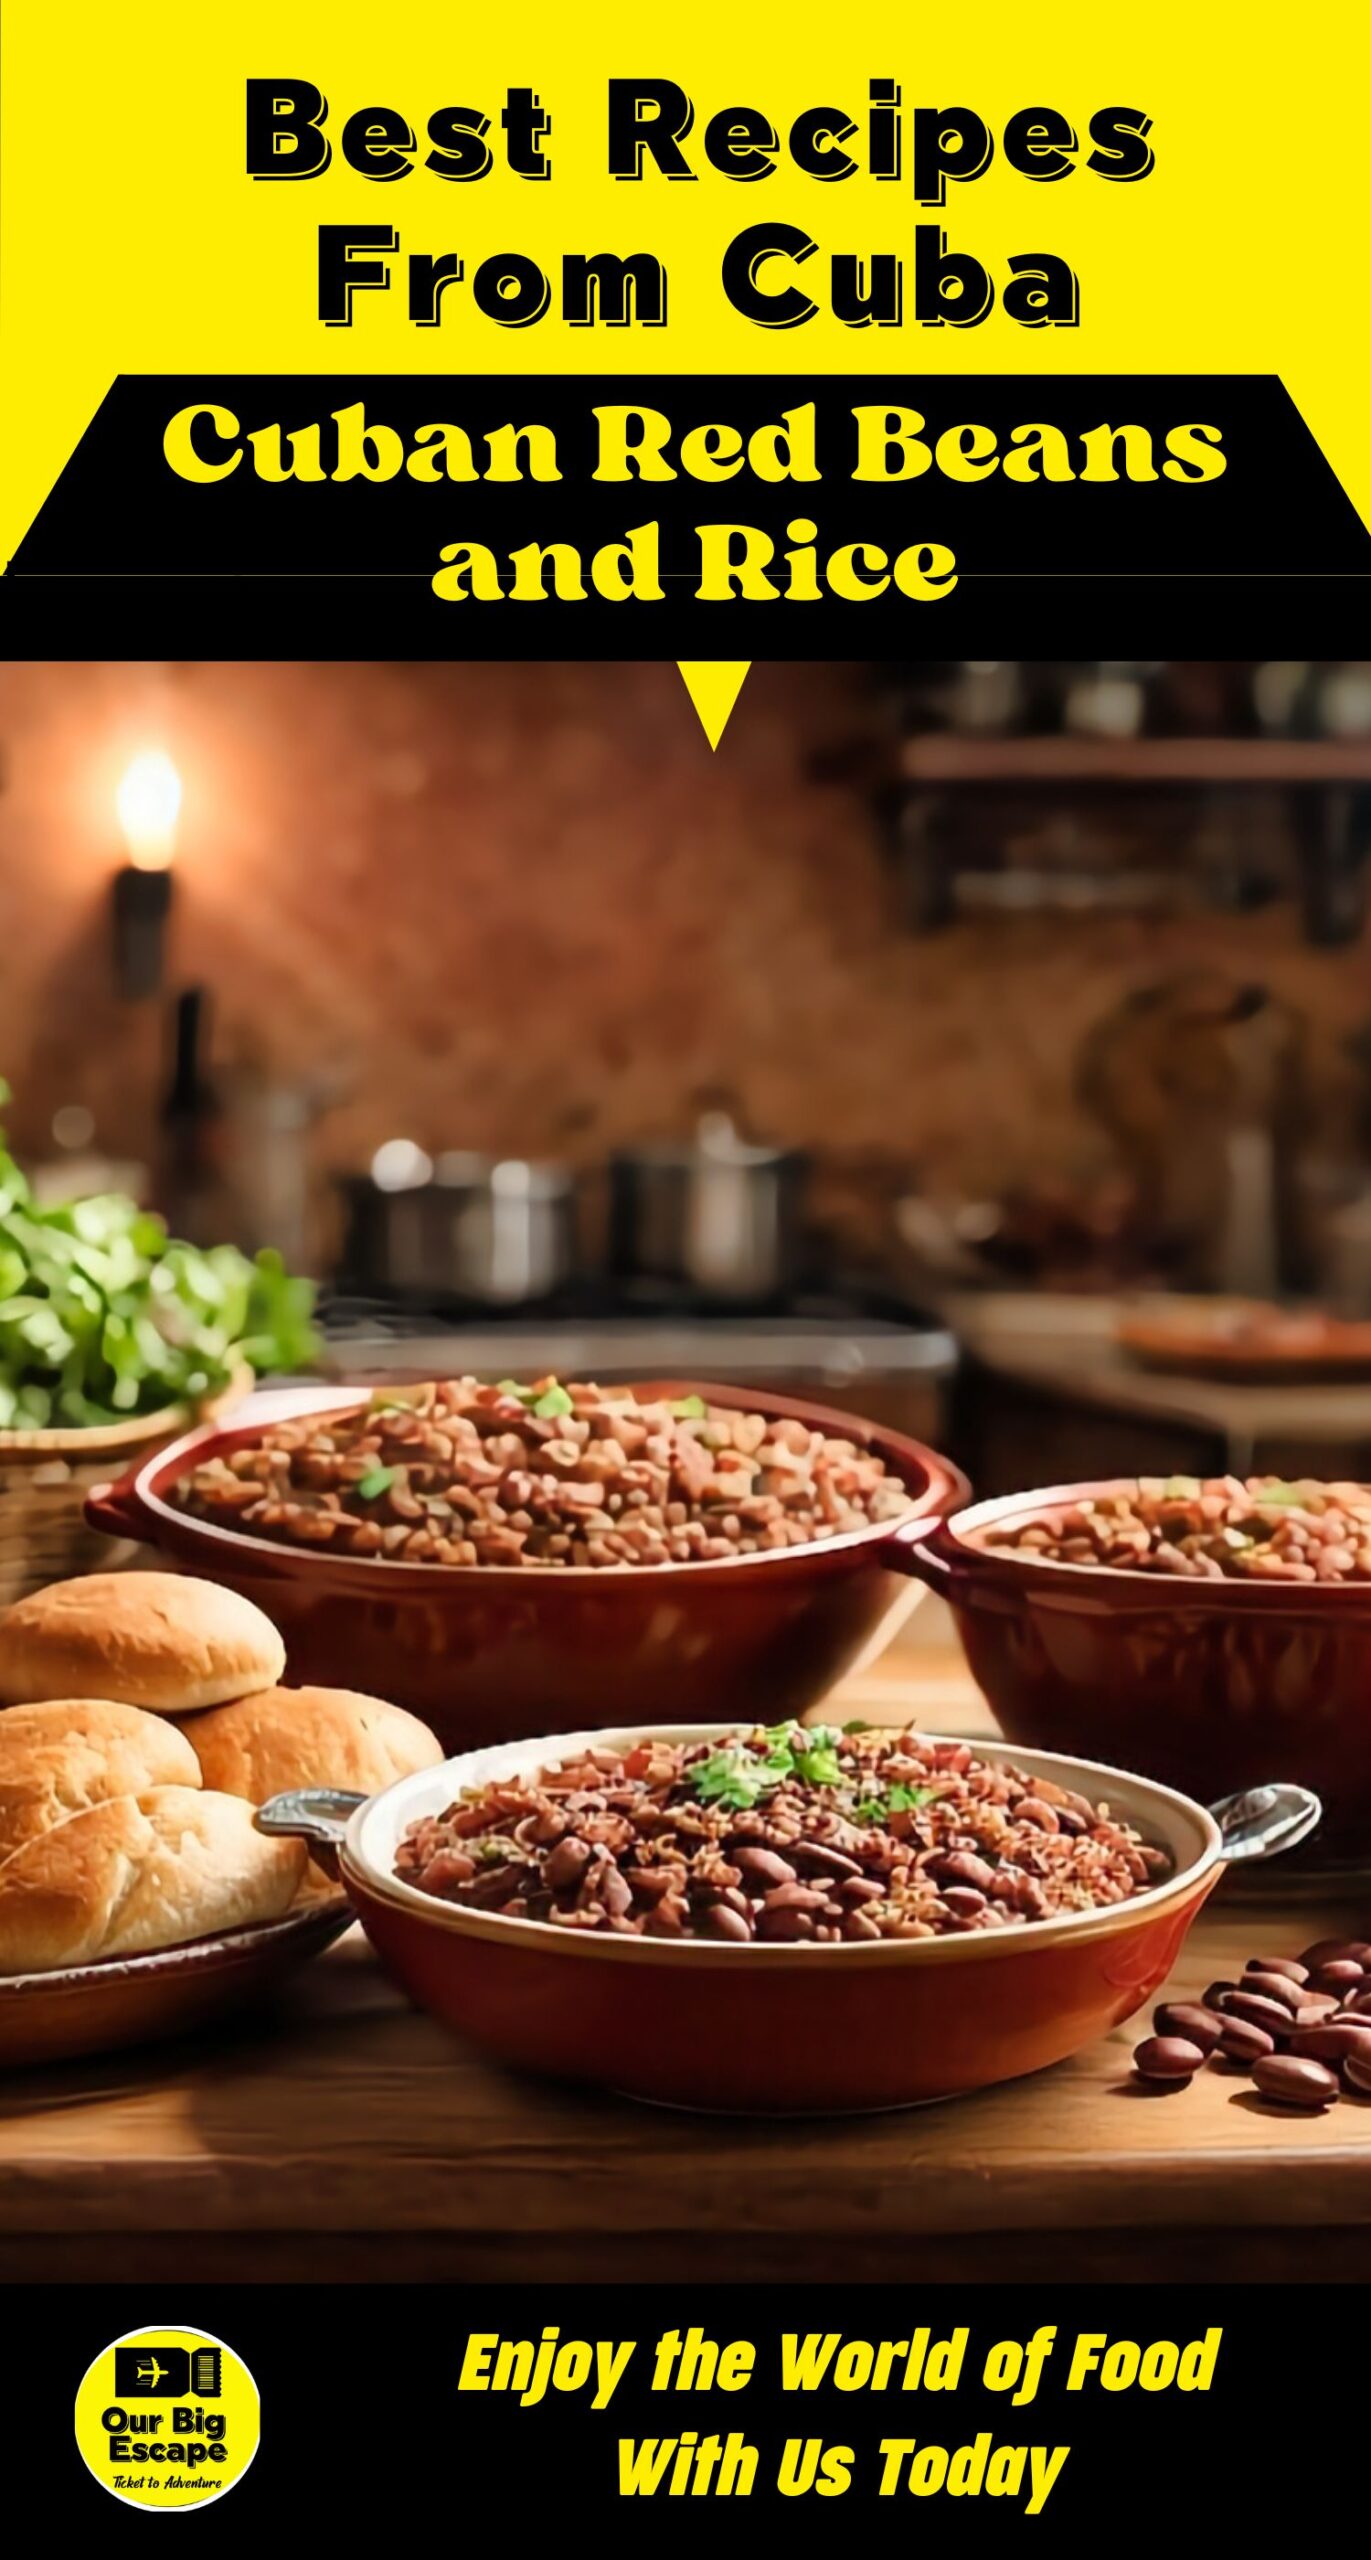 15. Cuban Red Beans and Rice (1)